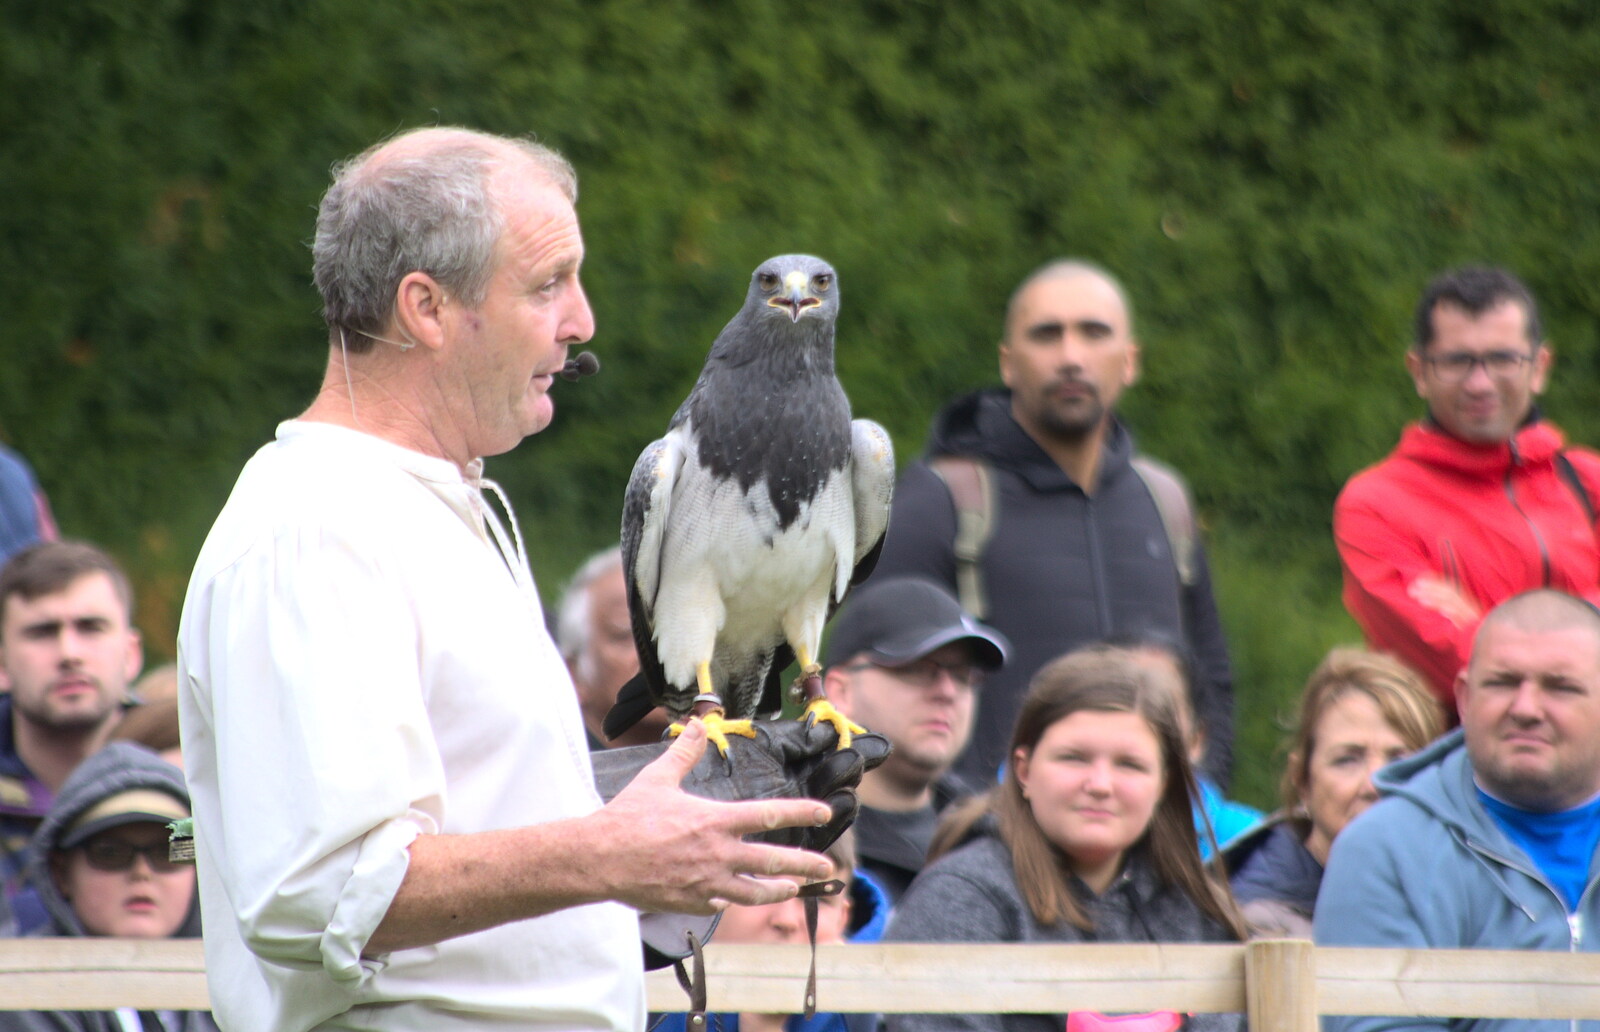 There's a birds-of-prey demo from A Day at Warwick Castle, Warwickshire - 8th September 2018